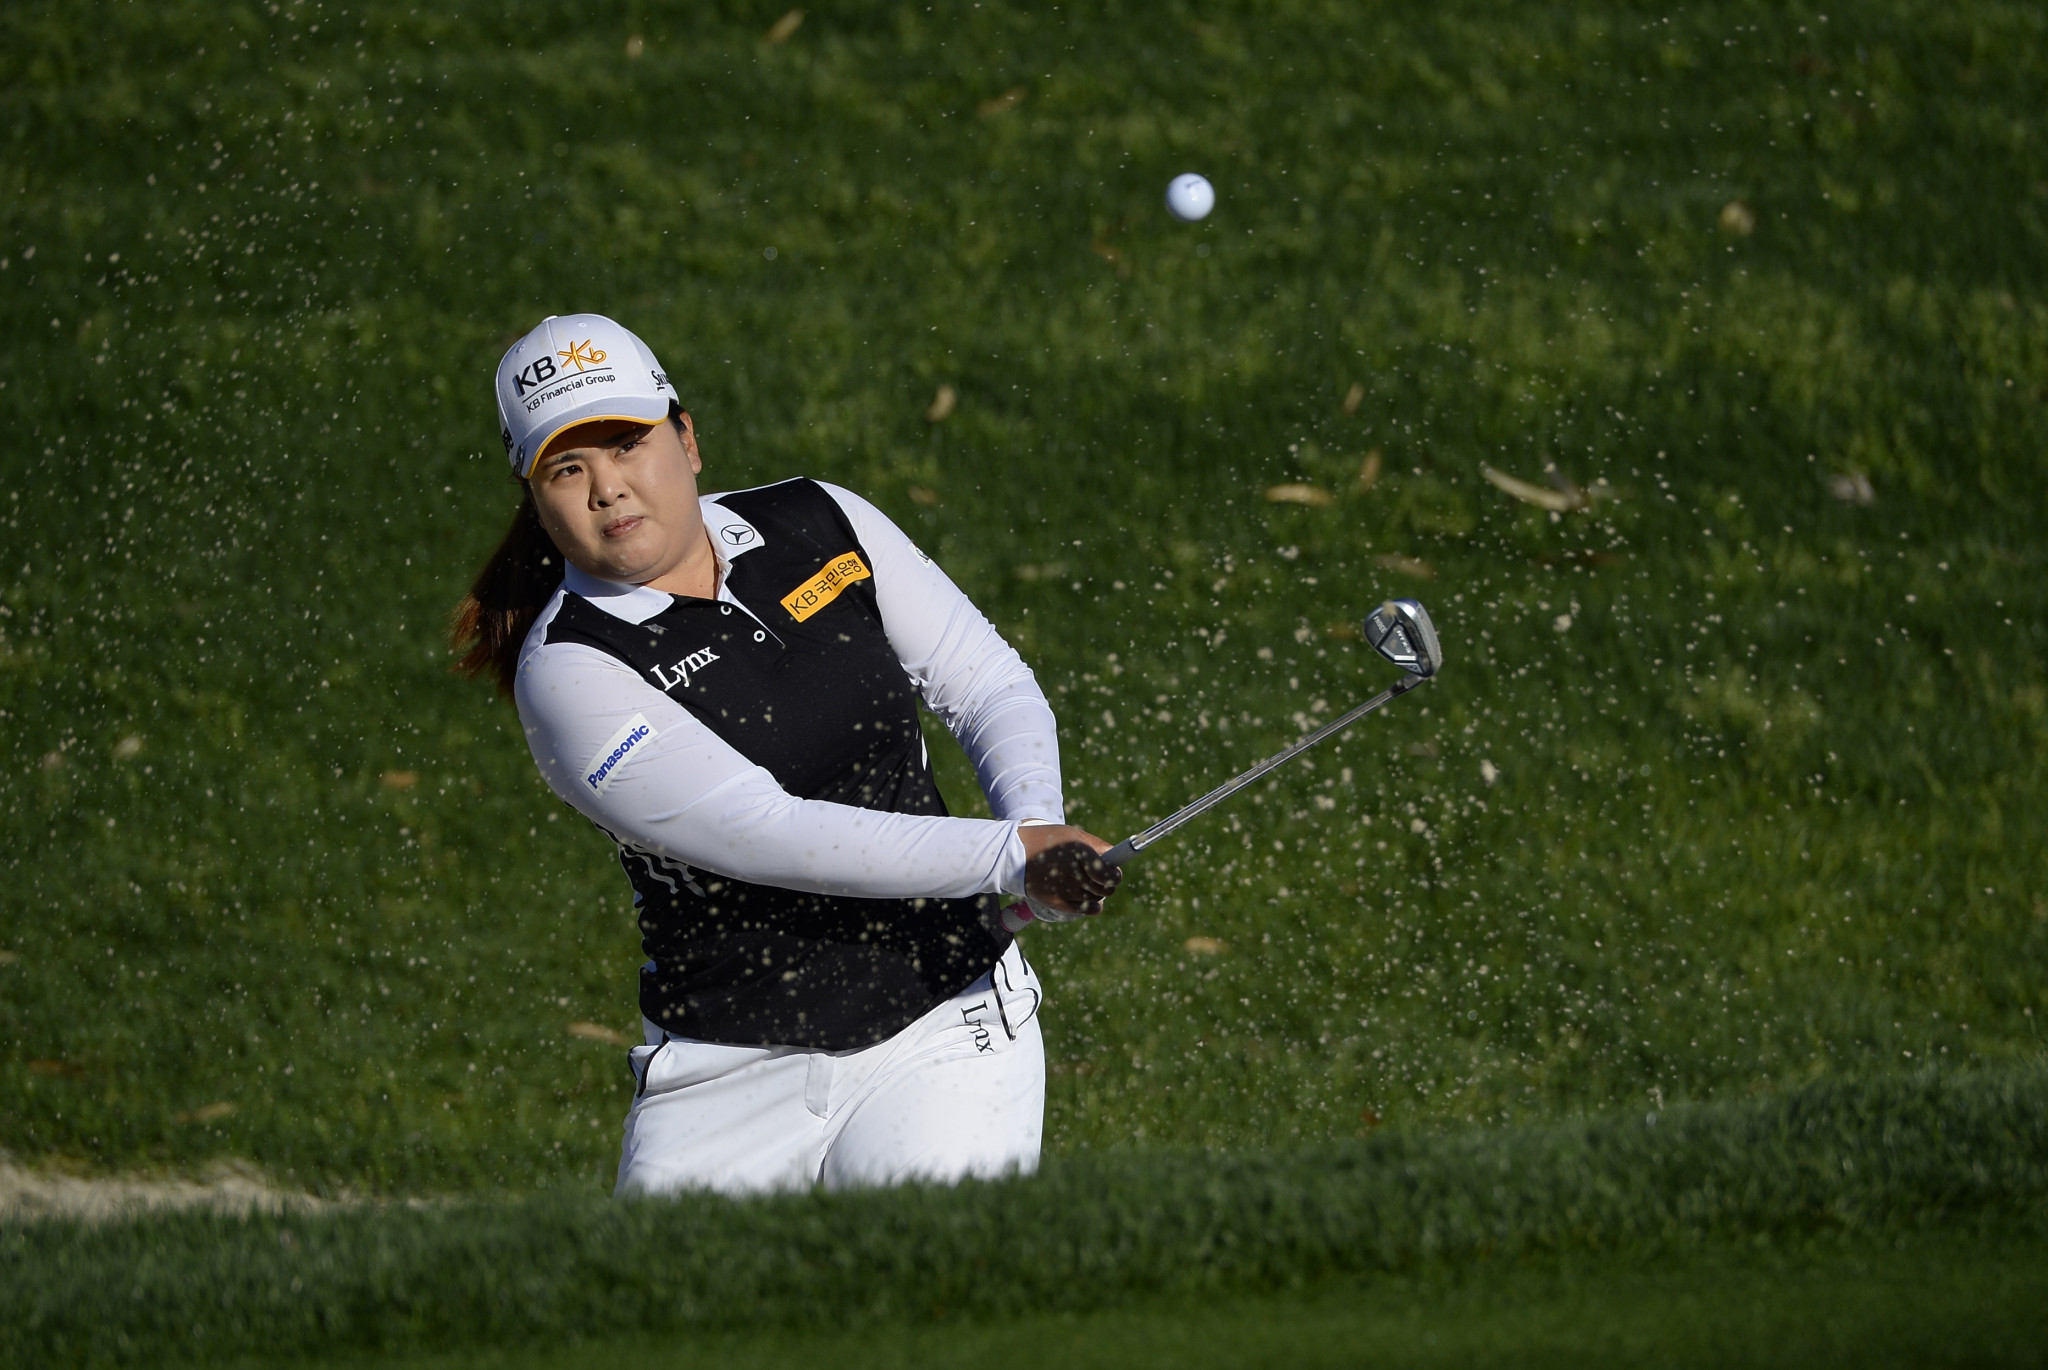 South Korea's Inbee Park had to settle for the runners-up spot ©Getty Images